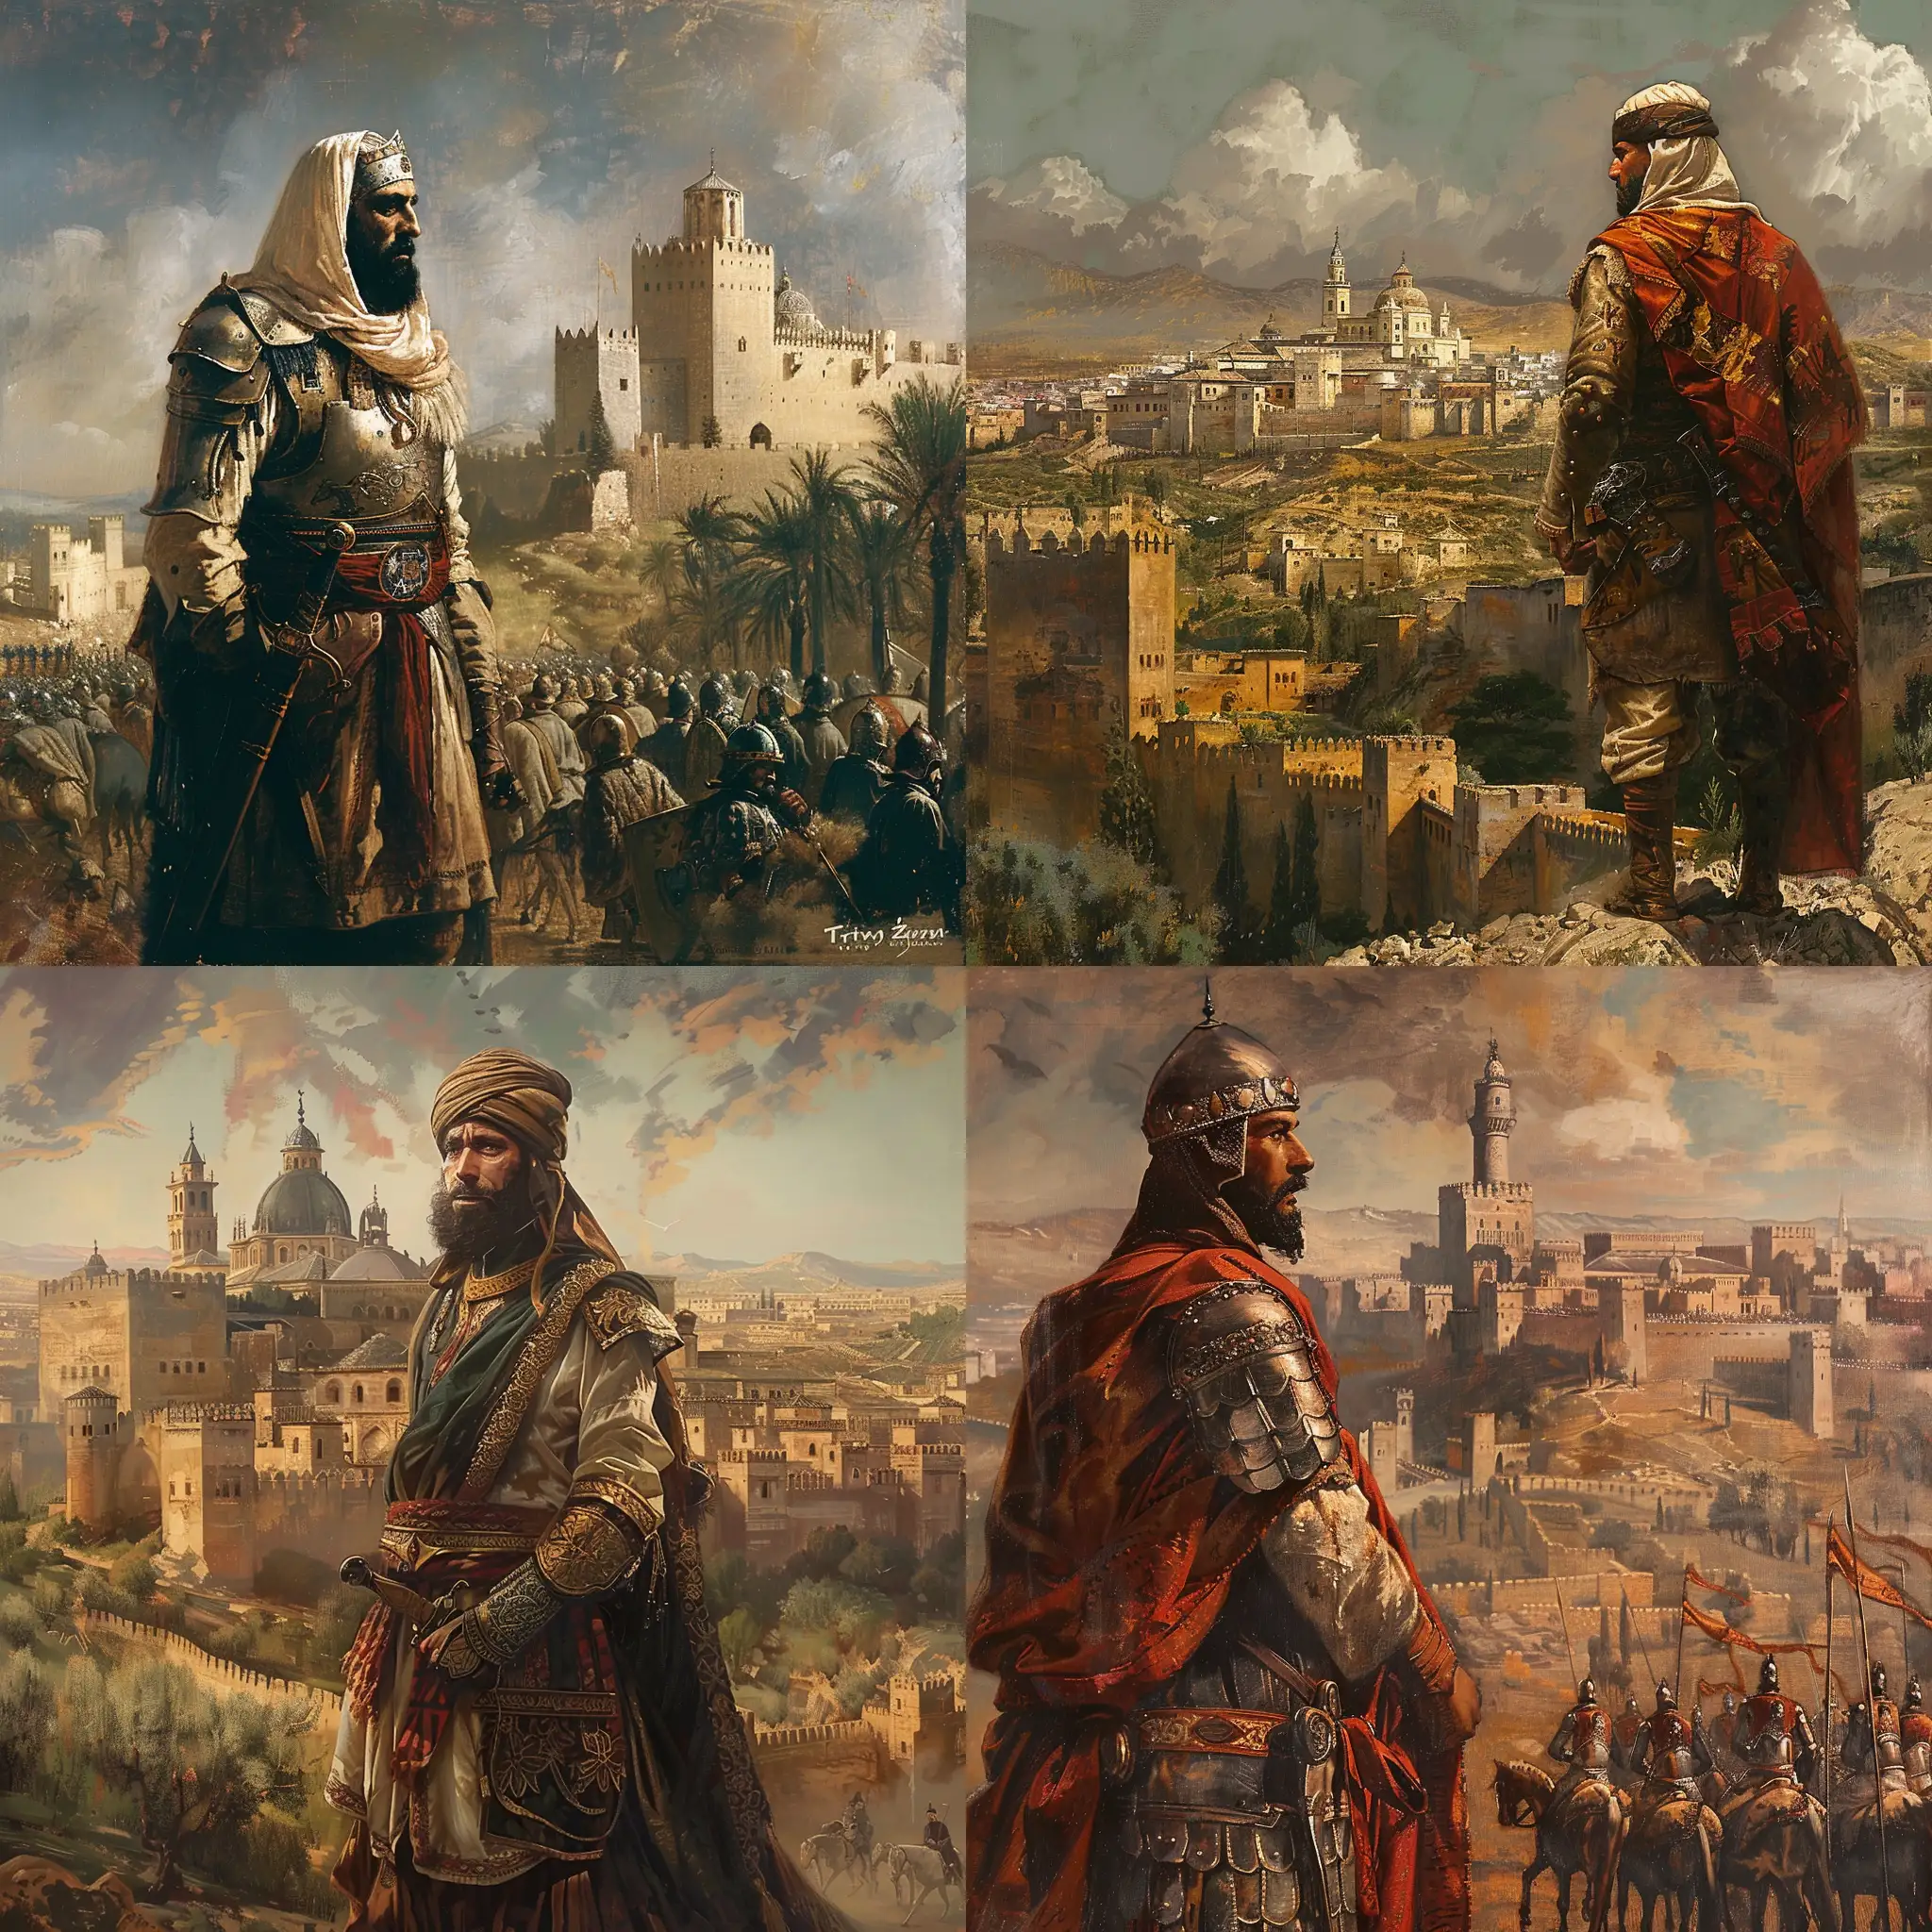 Tariq-Ibn-Ziyad-Conqueror-of-Spain-Standing-Before-Andalusia